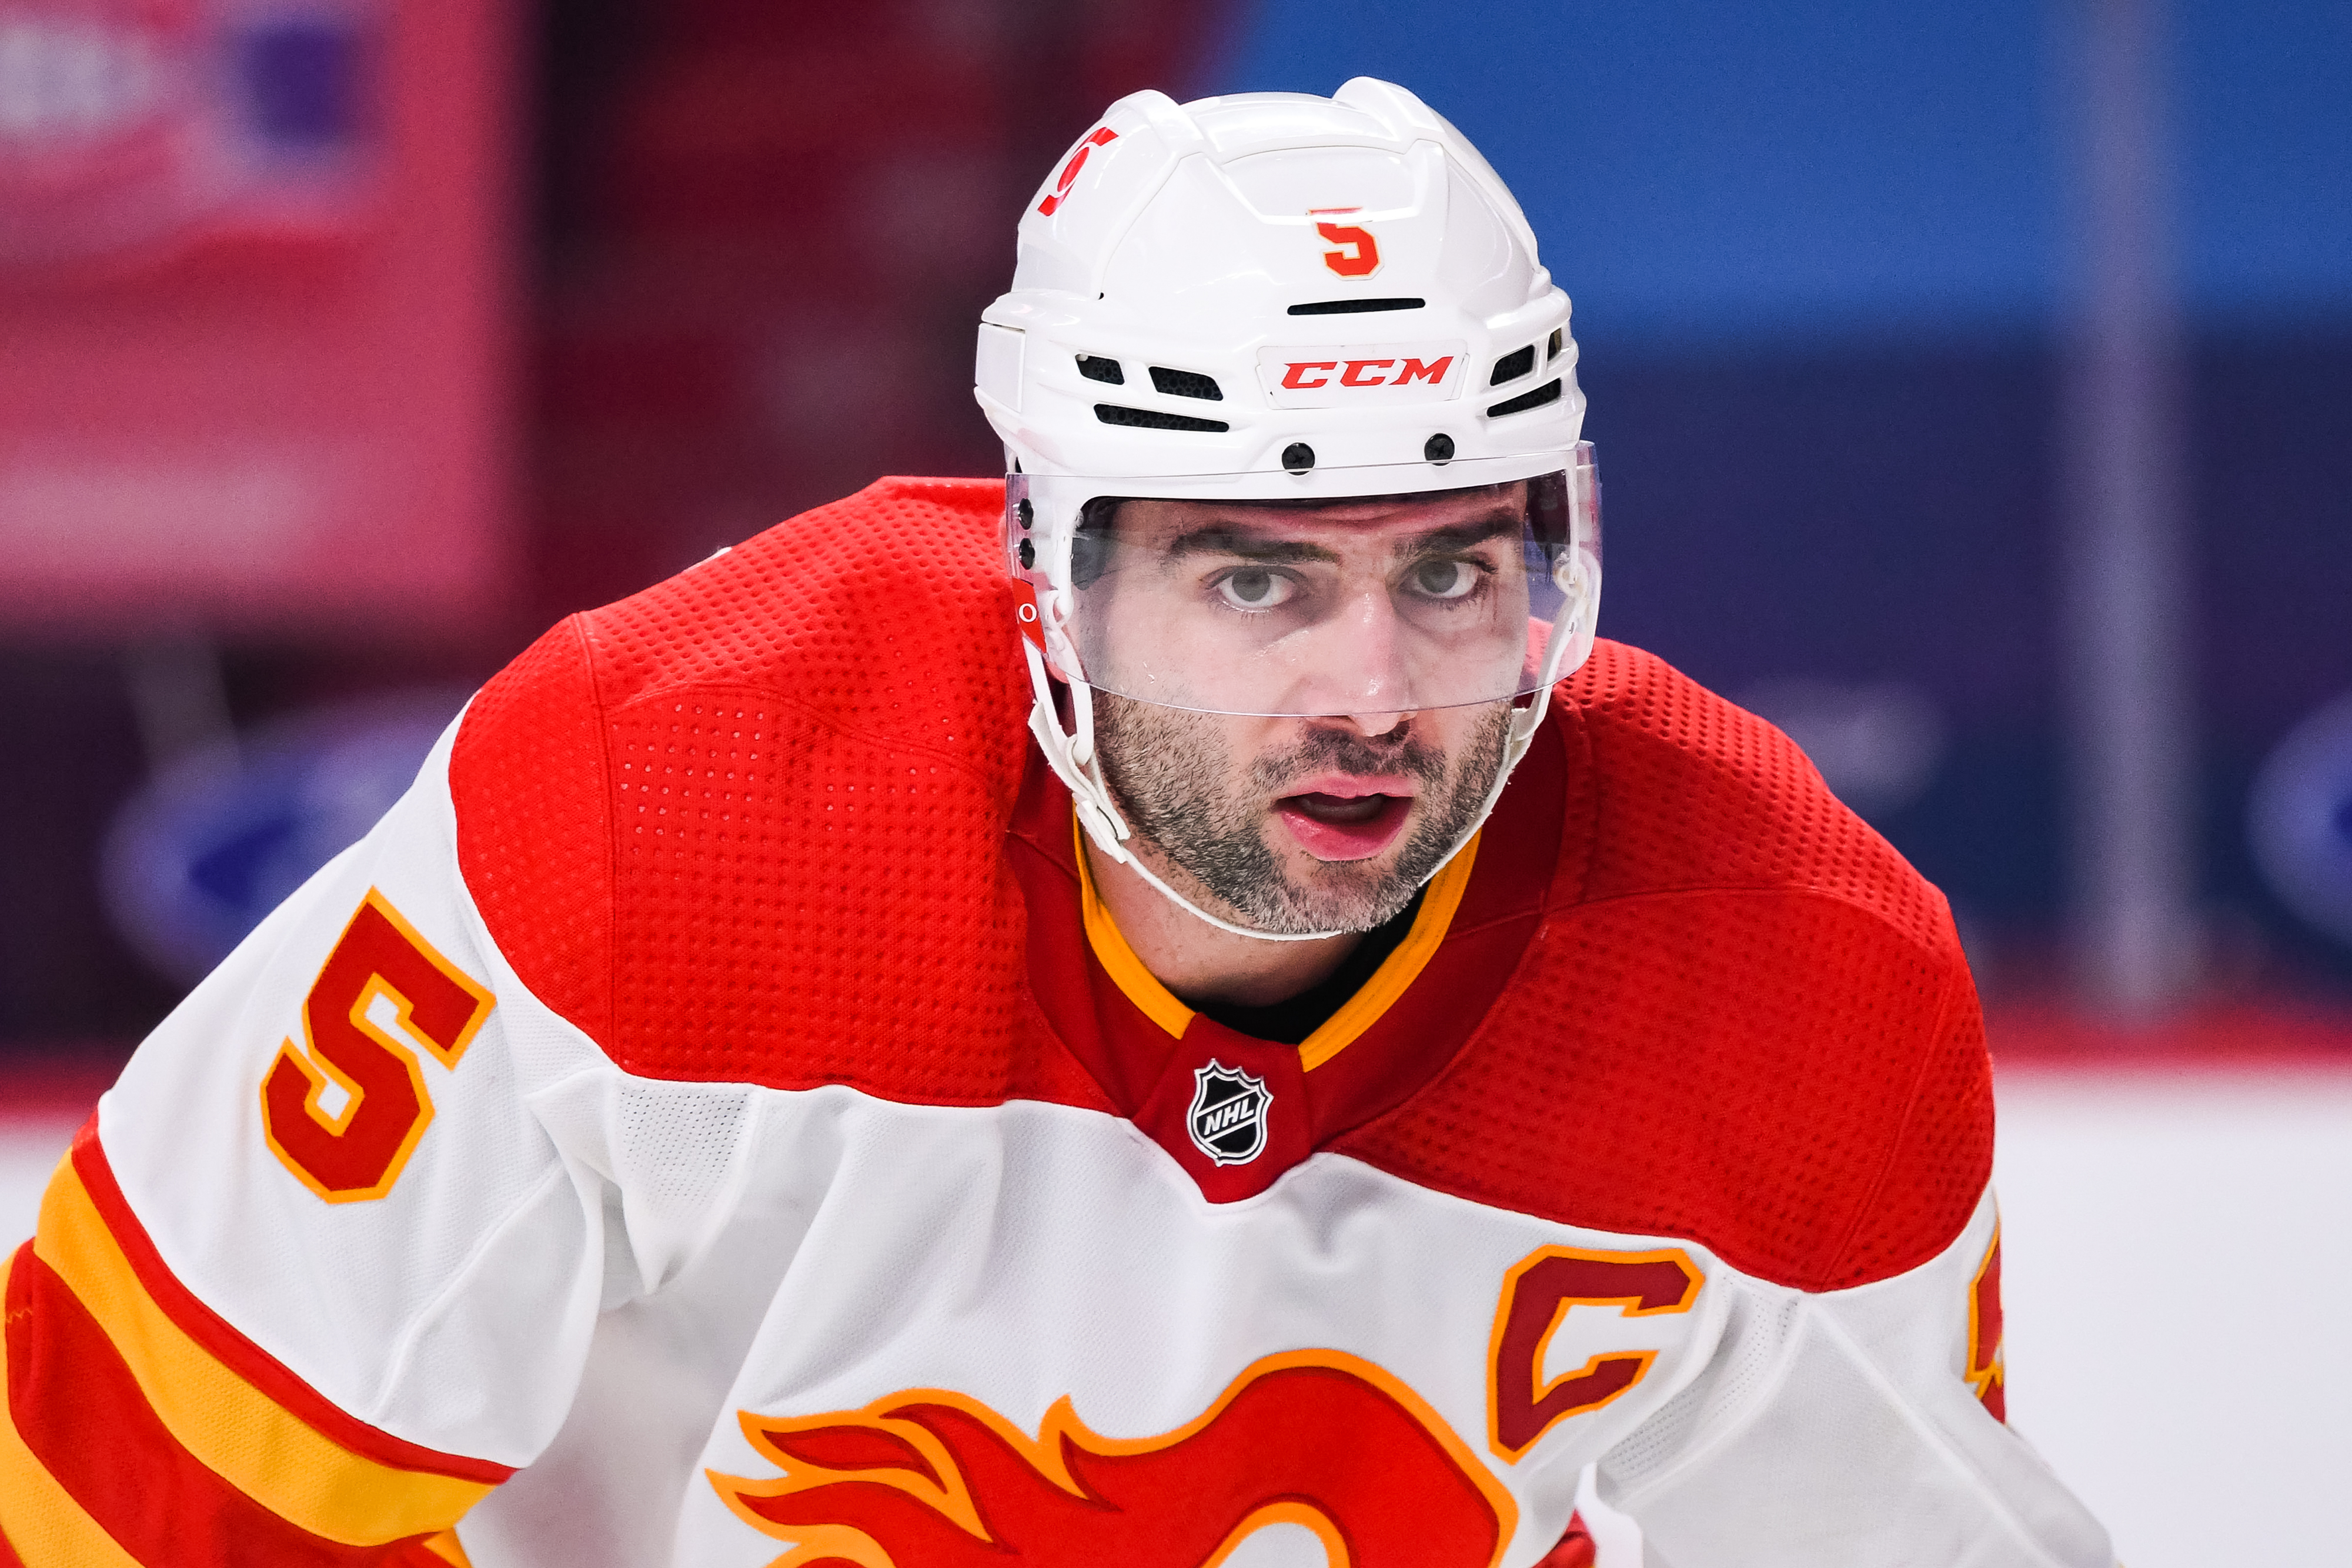 Look on Calgary Flames defenceman Mark Giordano during the Calgary Flames versus the Montreal Canadiens game on April 16, 2021, at Bell Centre in Montreal, QC. 